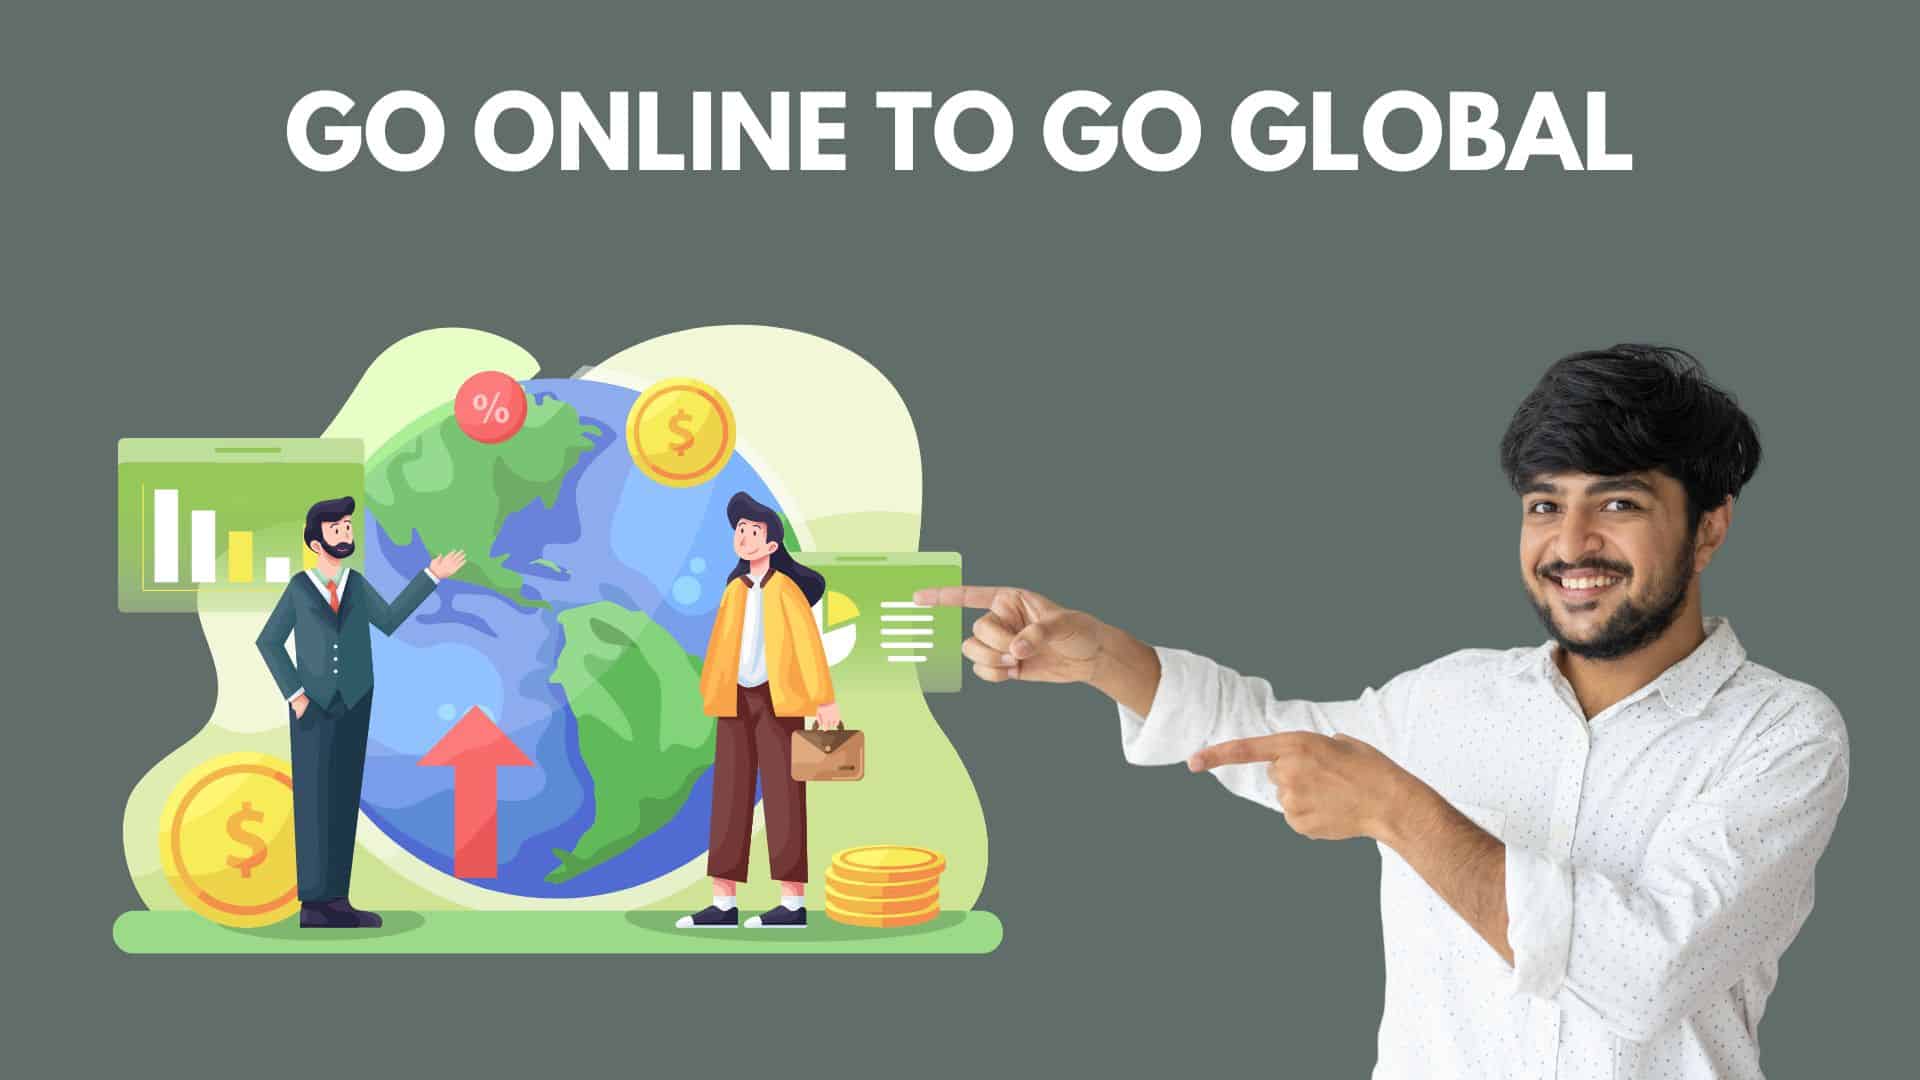 Step-by-Step Guide: Taking Indian Textile Businesses Online and Going Global with Digital Marketing